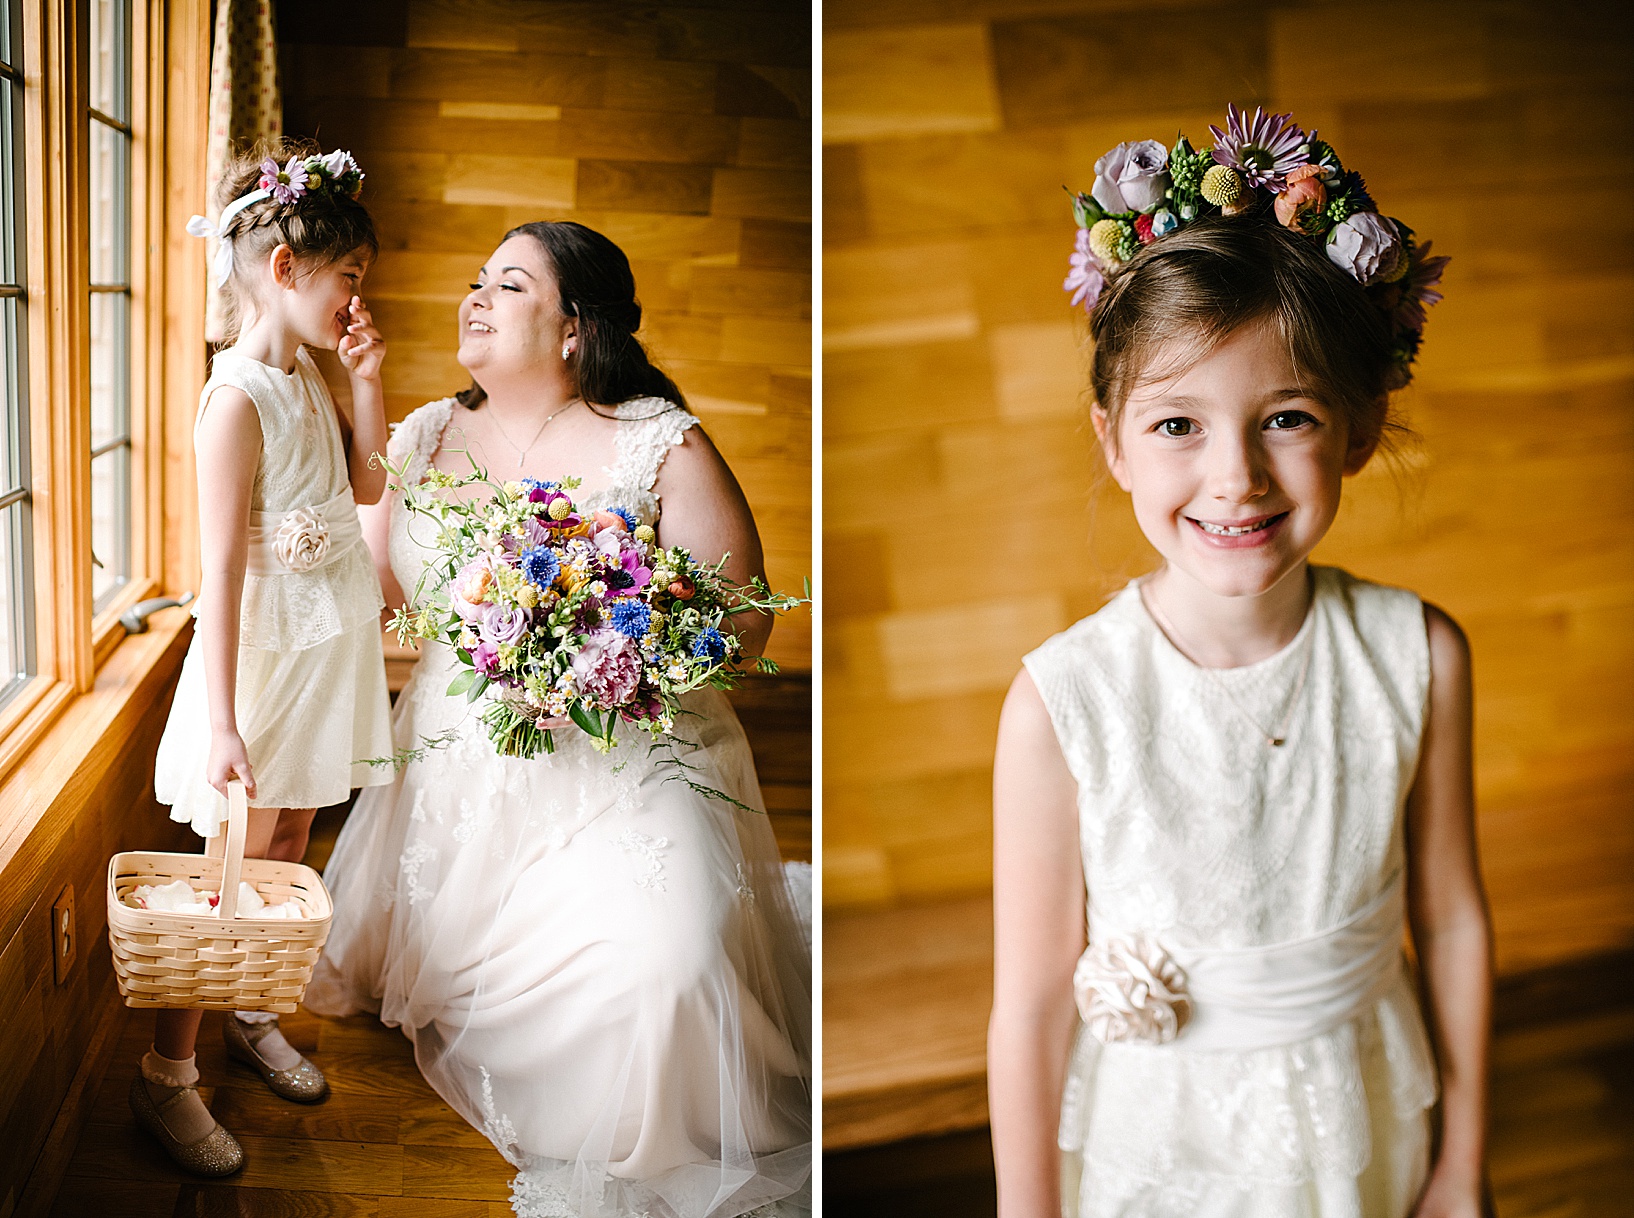 Bride and flower girl smile at each other while bride holds bouquet and flower girl wears matching flower crown